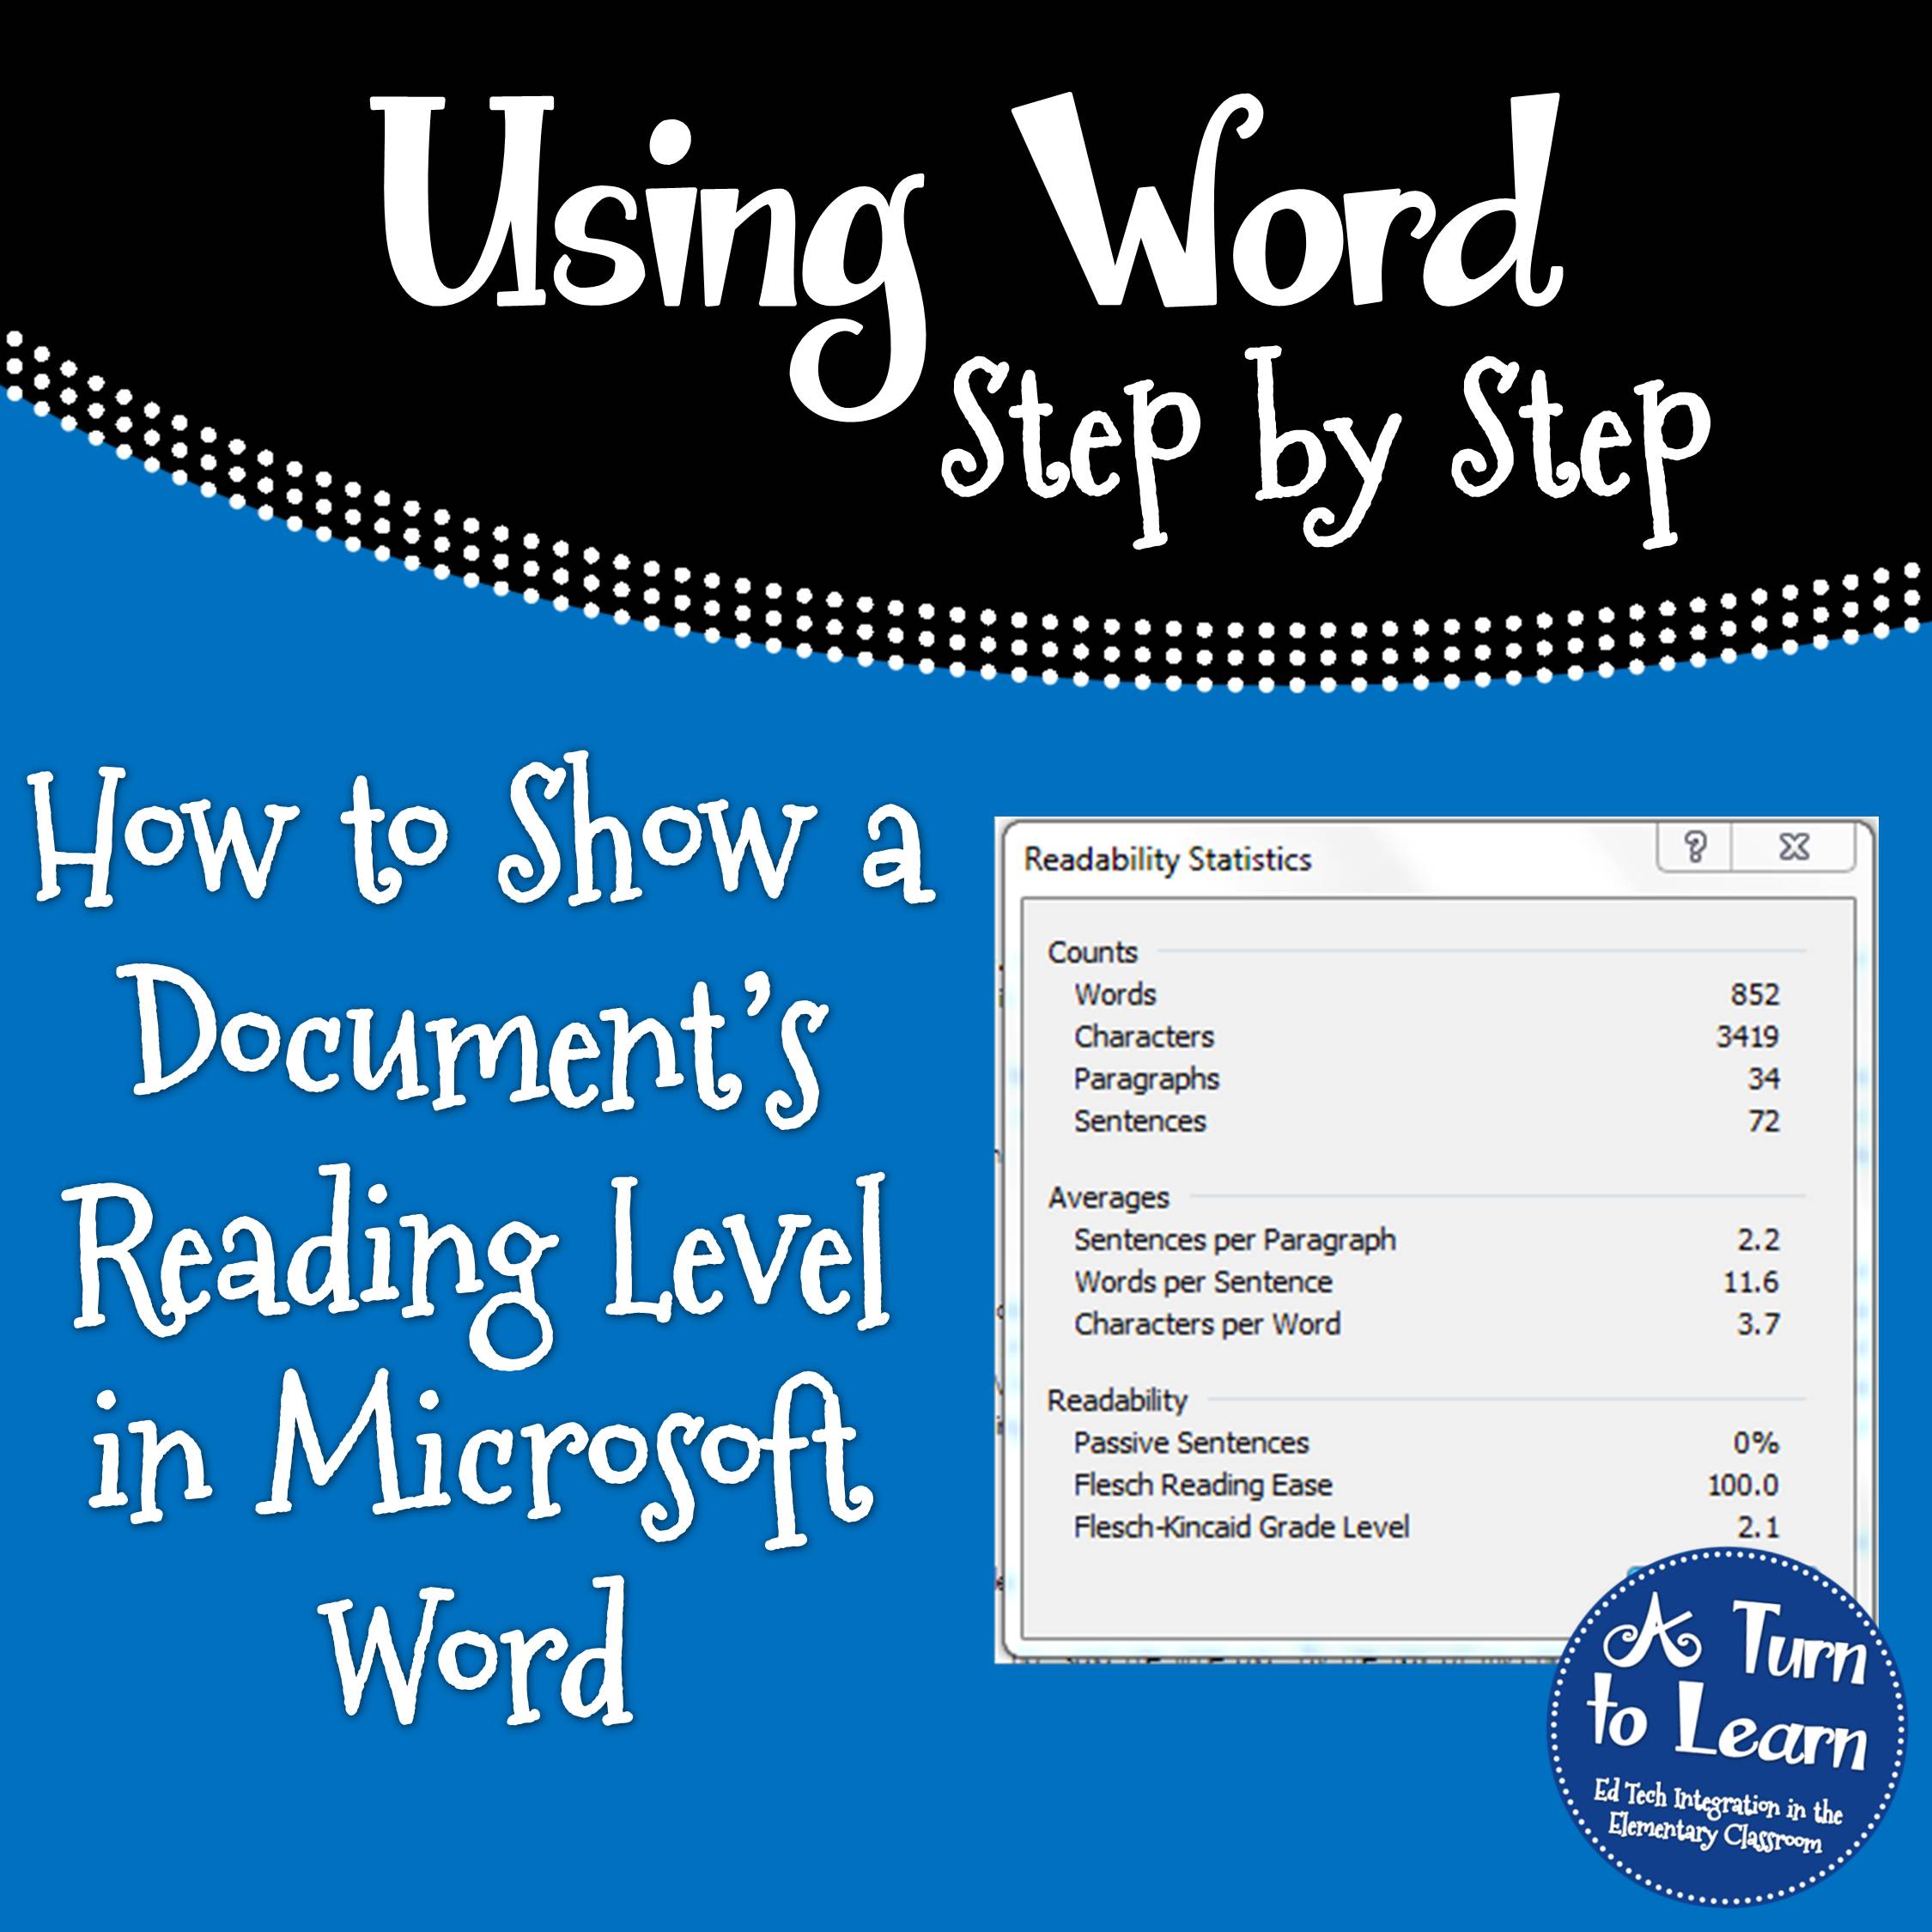 How to Show a Document's Reading Level in Word